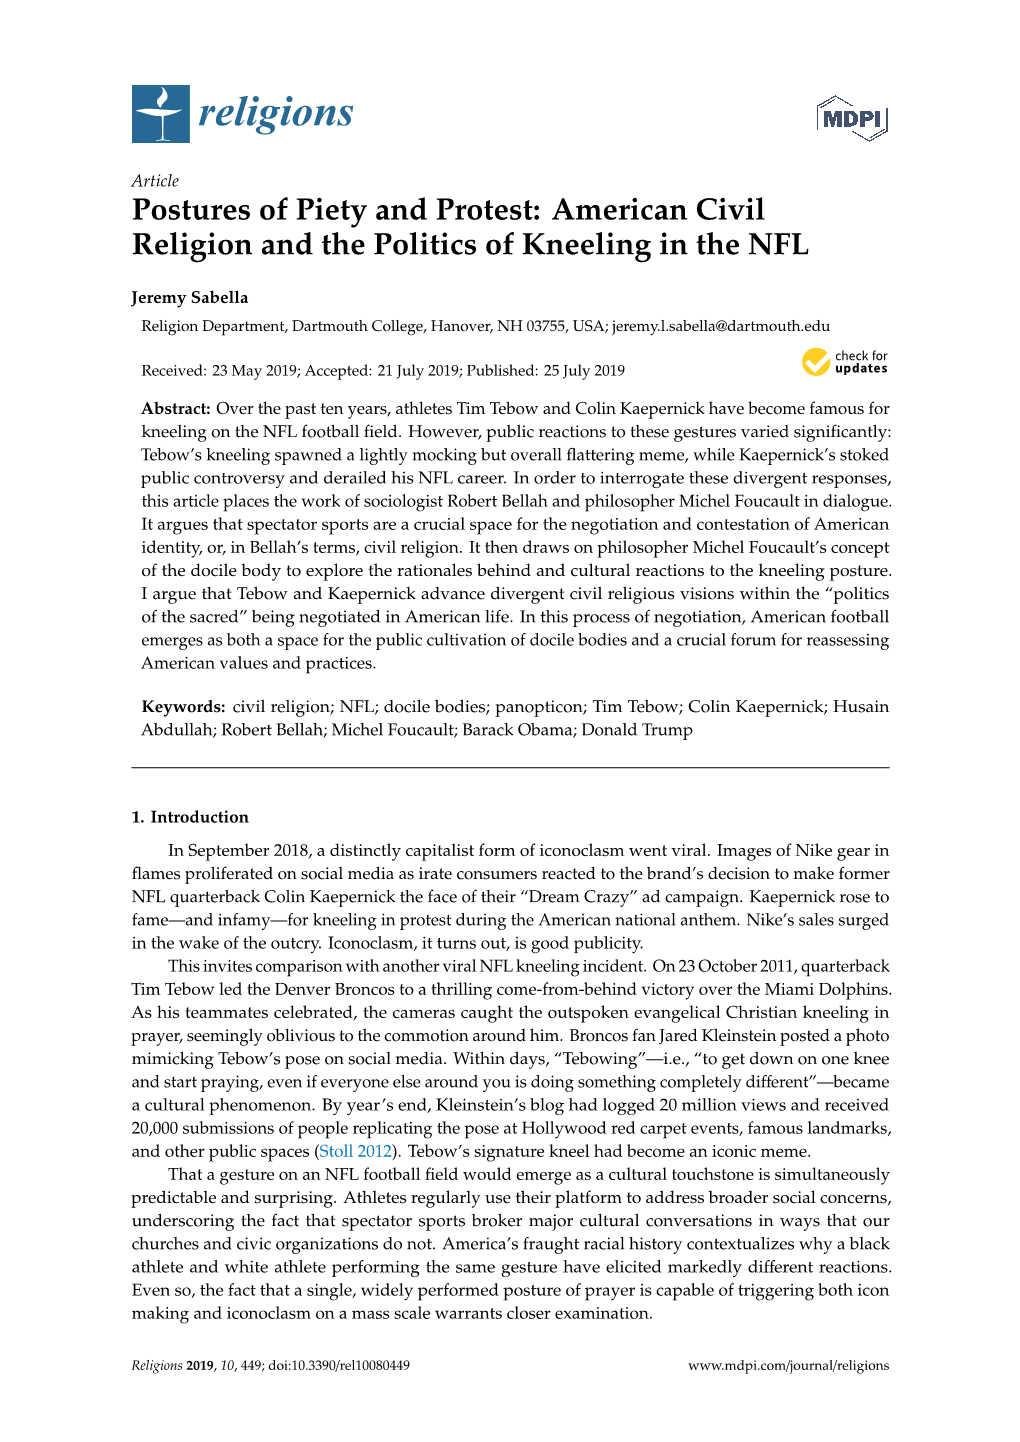 Postures of Piety and Protest: American Civil Religion and the Politics of Kneeling in the NFL